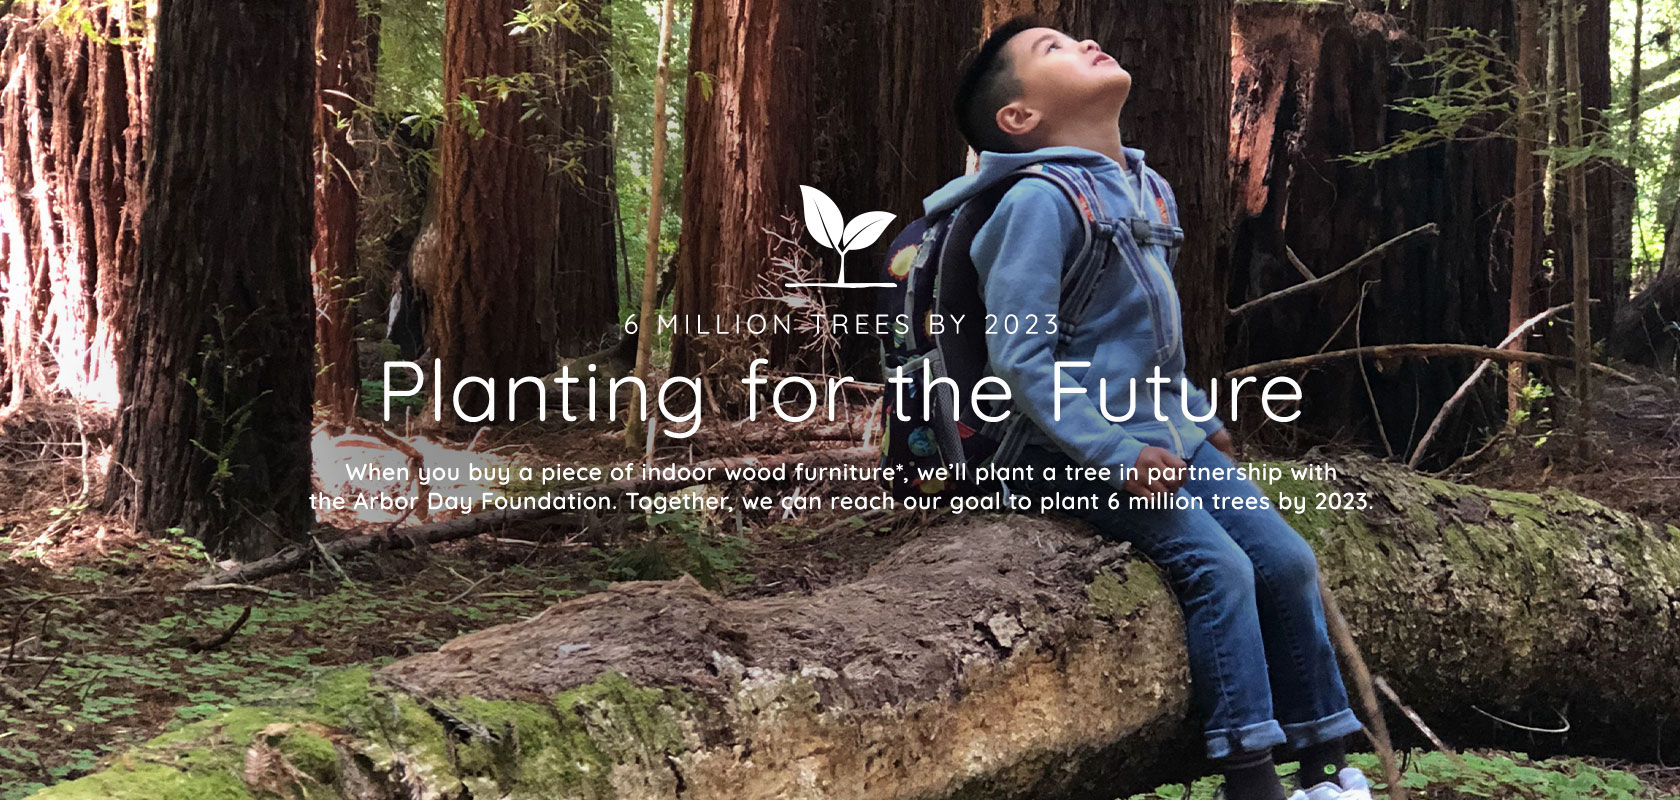 The Maker of Quilted Northern® Partners with Arbor Day Foundation® to Plant  Two Million Trees Across U.S. by End of 2021